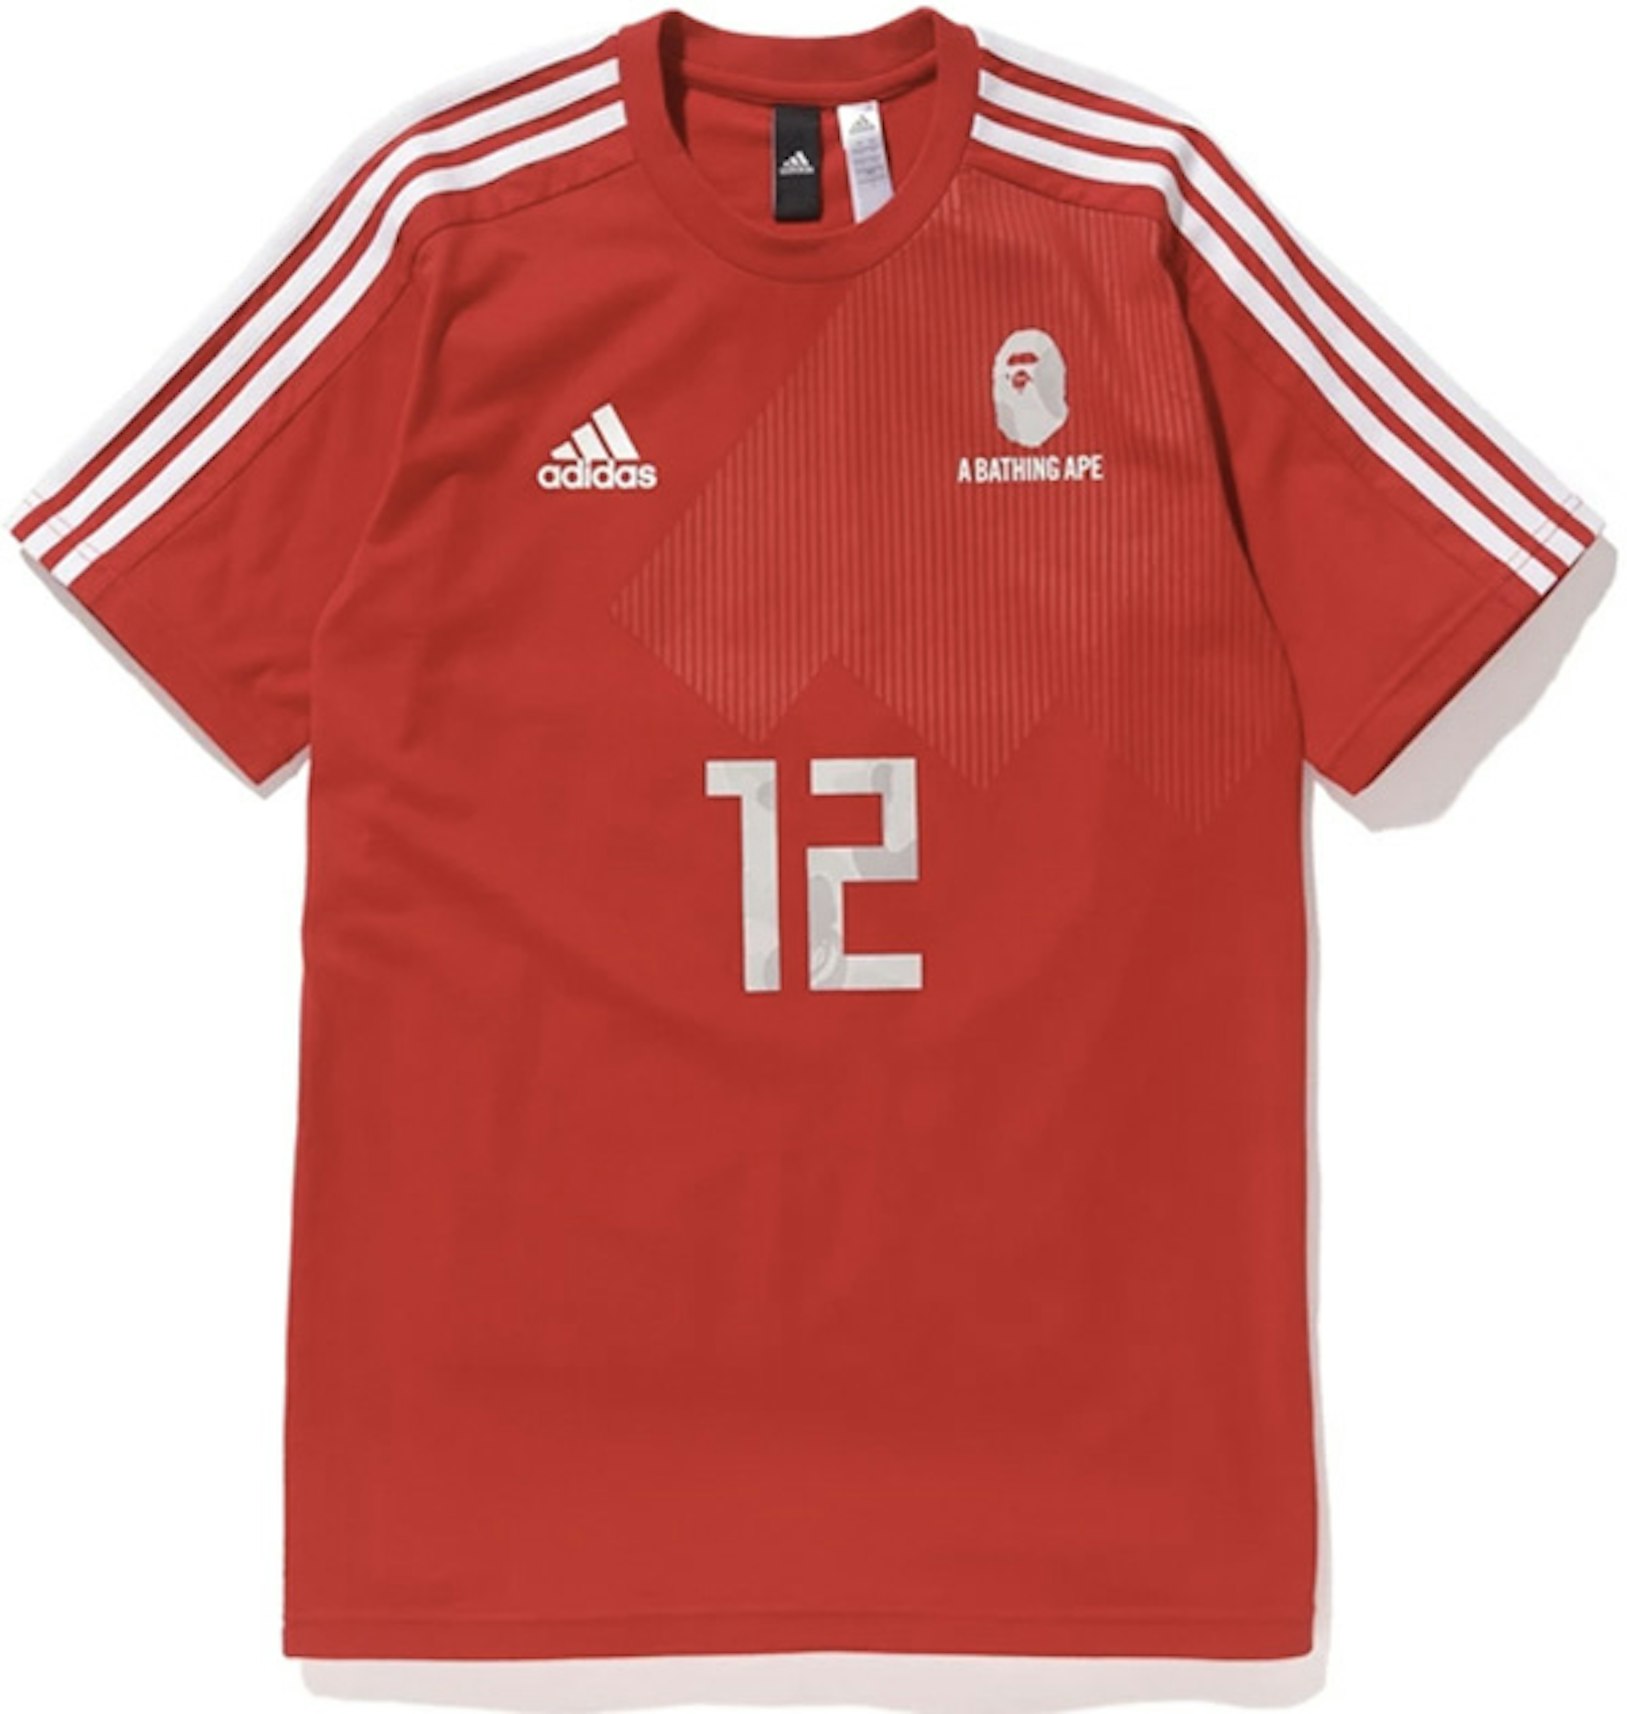 BAPE x adidas Cup 2018 Winning Collection Football Top Red - SS18 Men's -